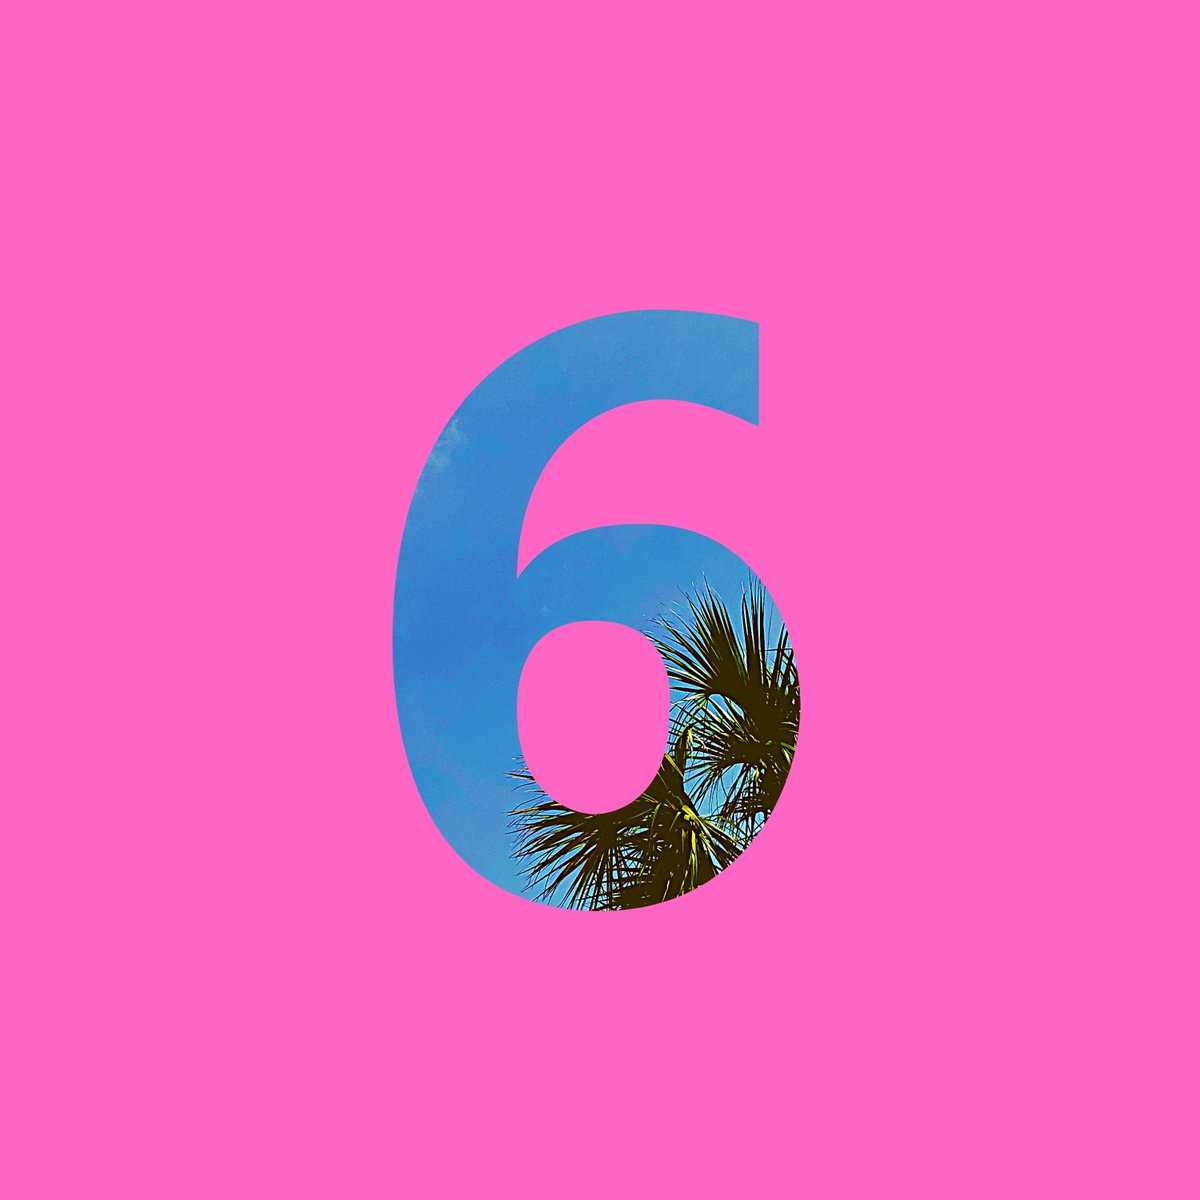 6️⃣ more days!! We’re so lucky to have had this track mixed and mastered by Mark Barrie🔥🔥🔥 seriously, such great work 💙
•
•
•
•
•
•
•
•
#newmusicsoon #newmusiccoming #indiebands #popbands #newsinglecomingsoon